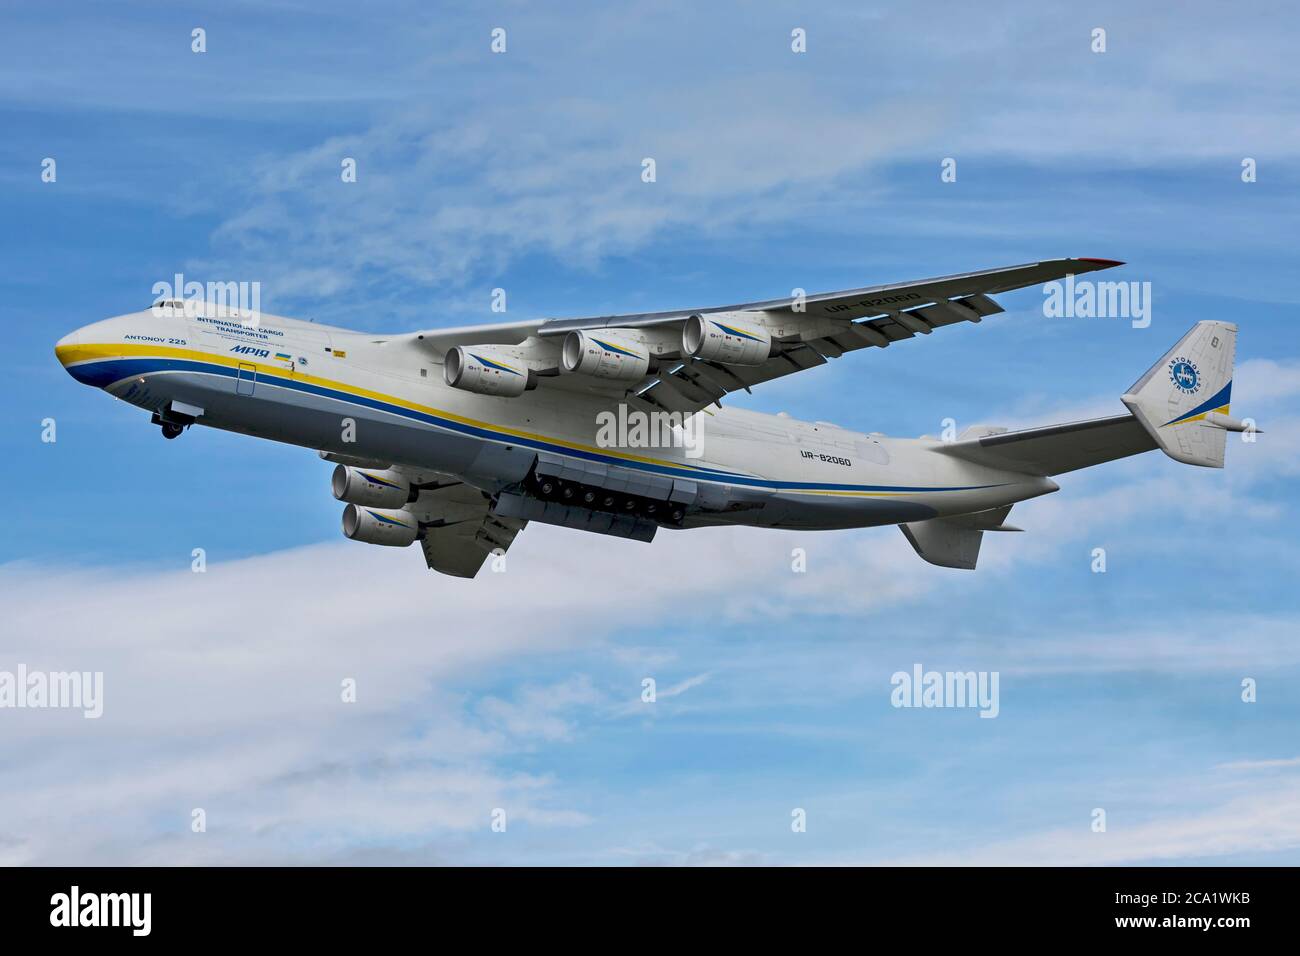 The Antonov An-225, the heaviest aircraft ever built and referred to as the world's largest aircraft. Photographed at Prestwick Airport, Scotland. Stock Photo